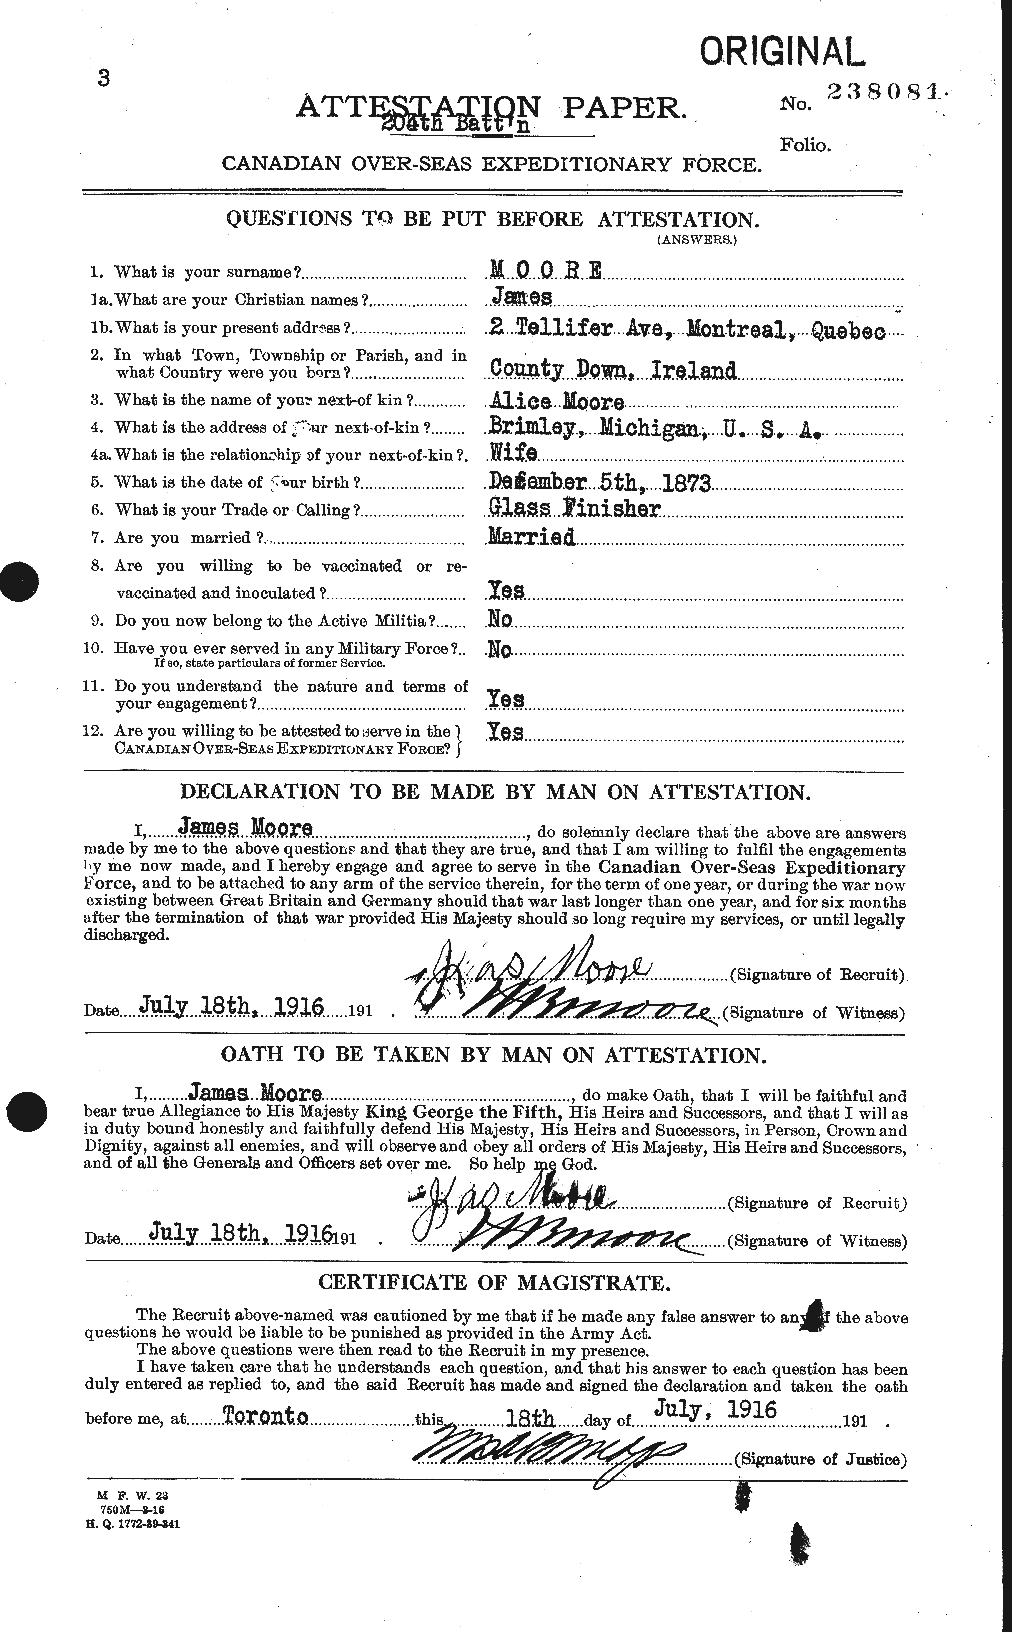 Personnel Records of the First World War - CEF 502190a